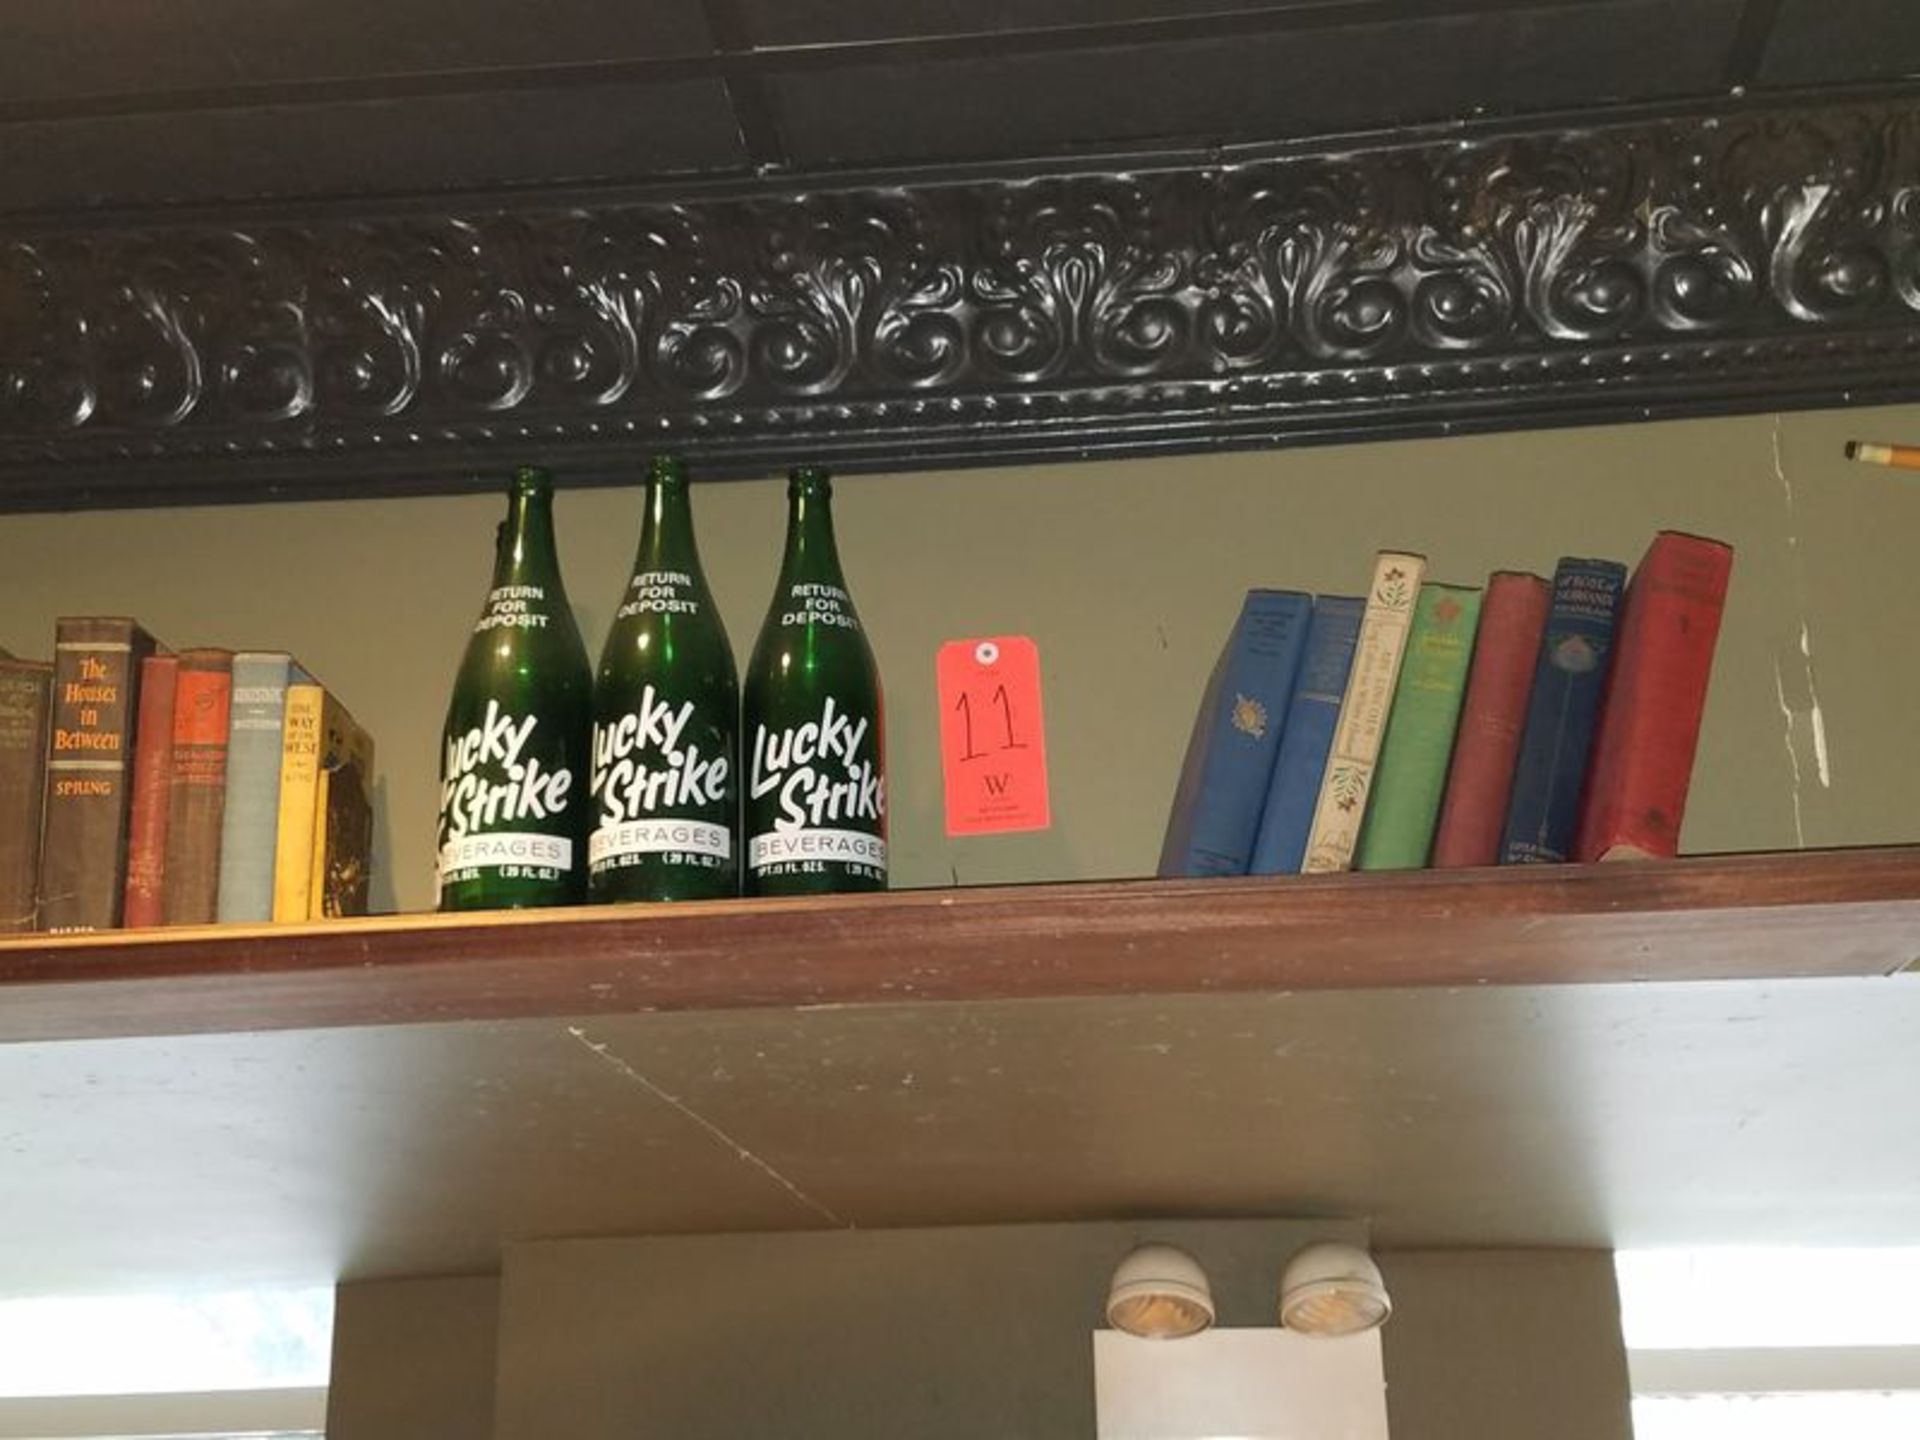 Lot - Assorted Books, Lucky Strike Bottles, Misc., with Shelf (Wall-Mounted) - Image 2 of 4